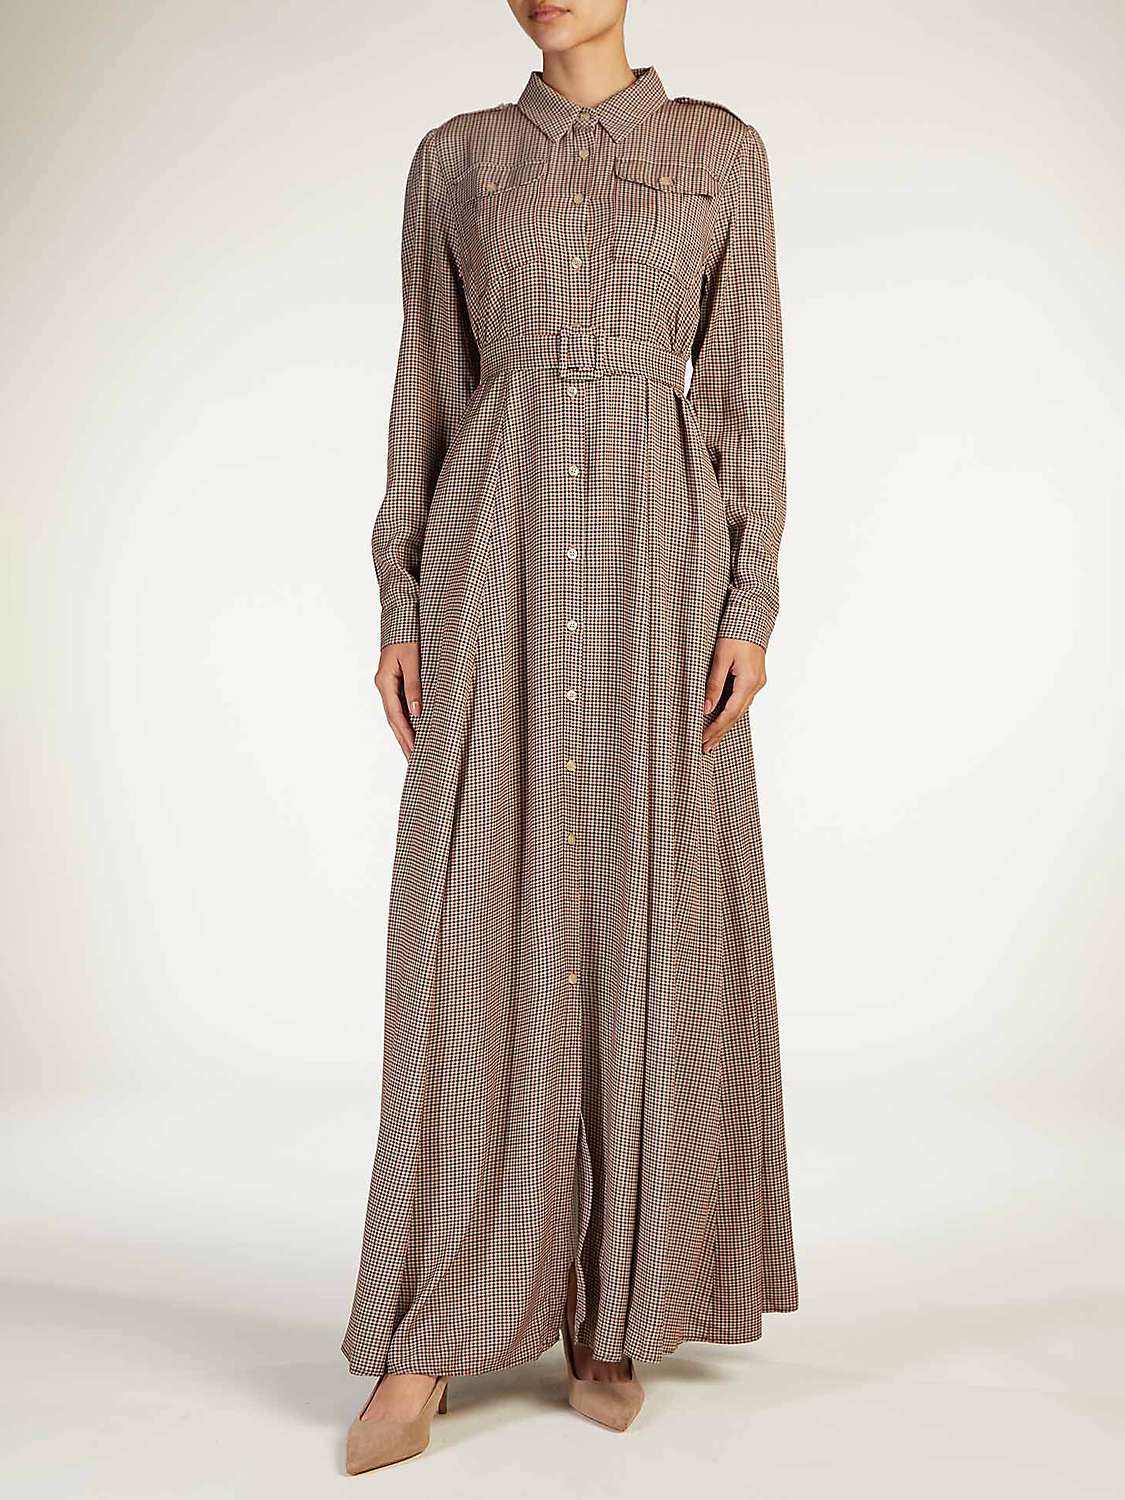 Buy Aab Utility Houndstooth Check Maxi Dress, Multi Online at johnlewis.com